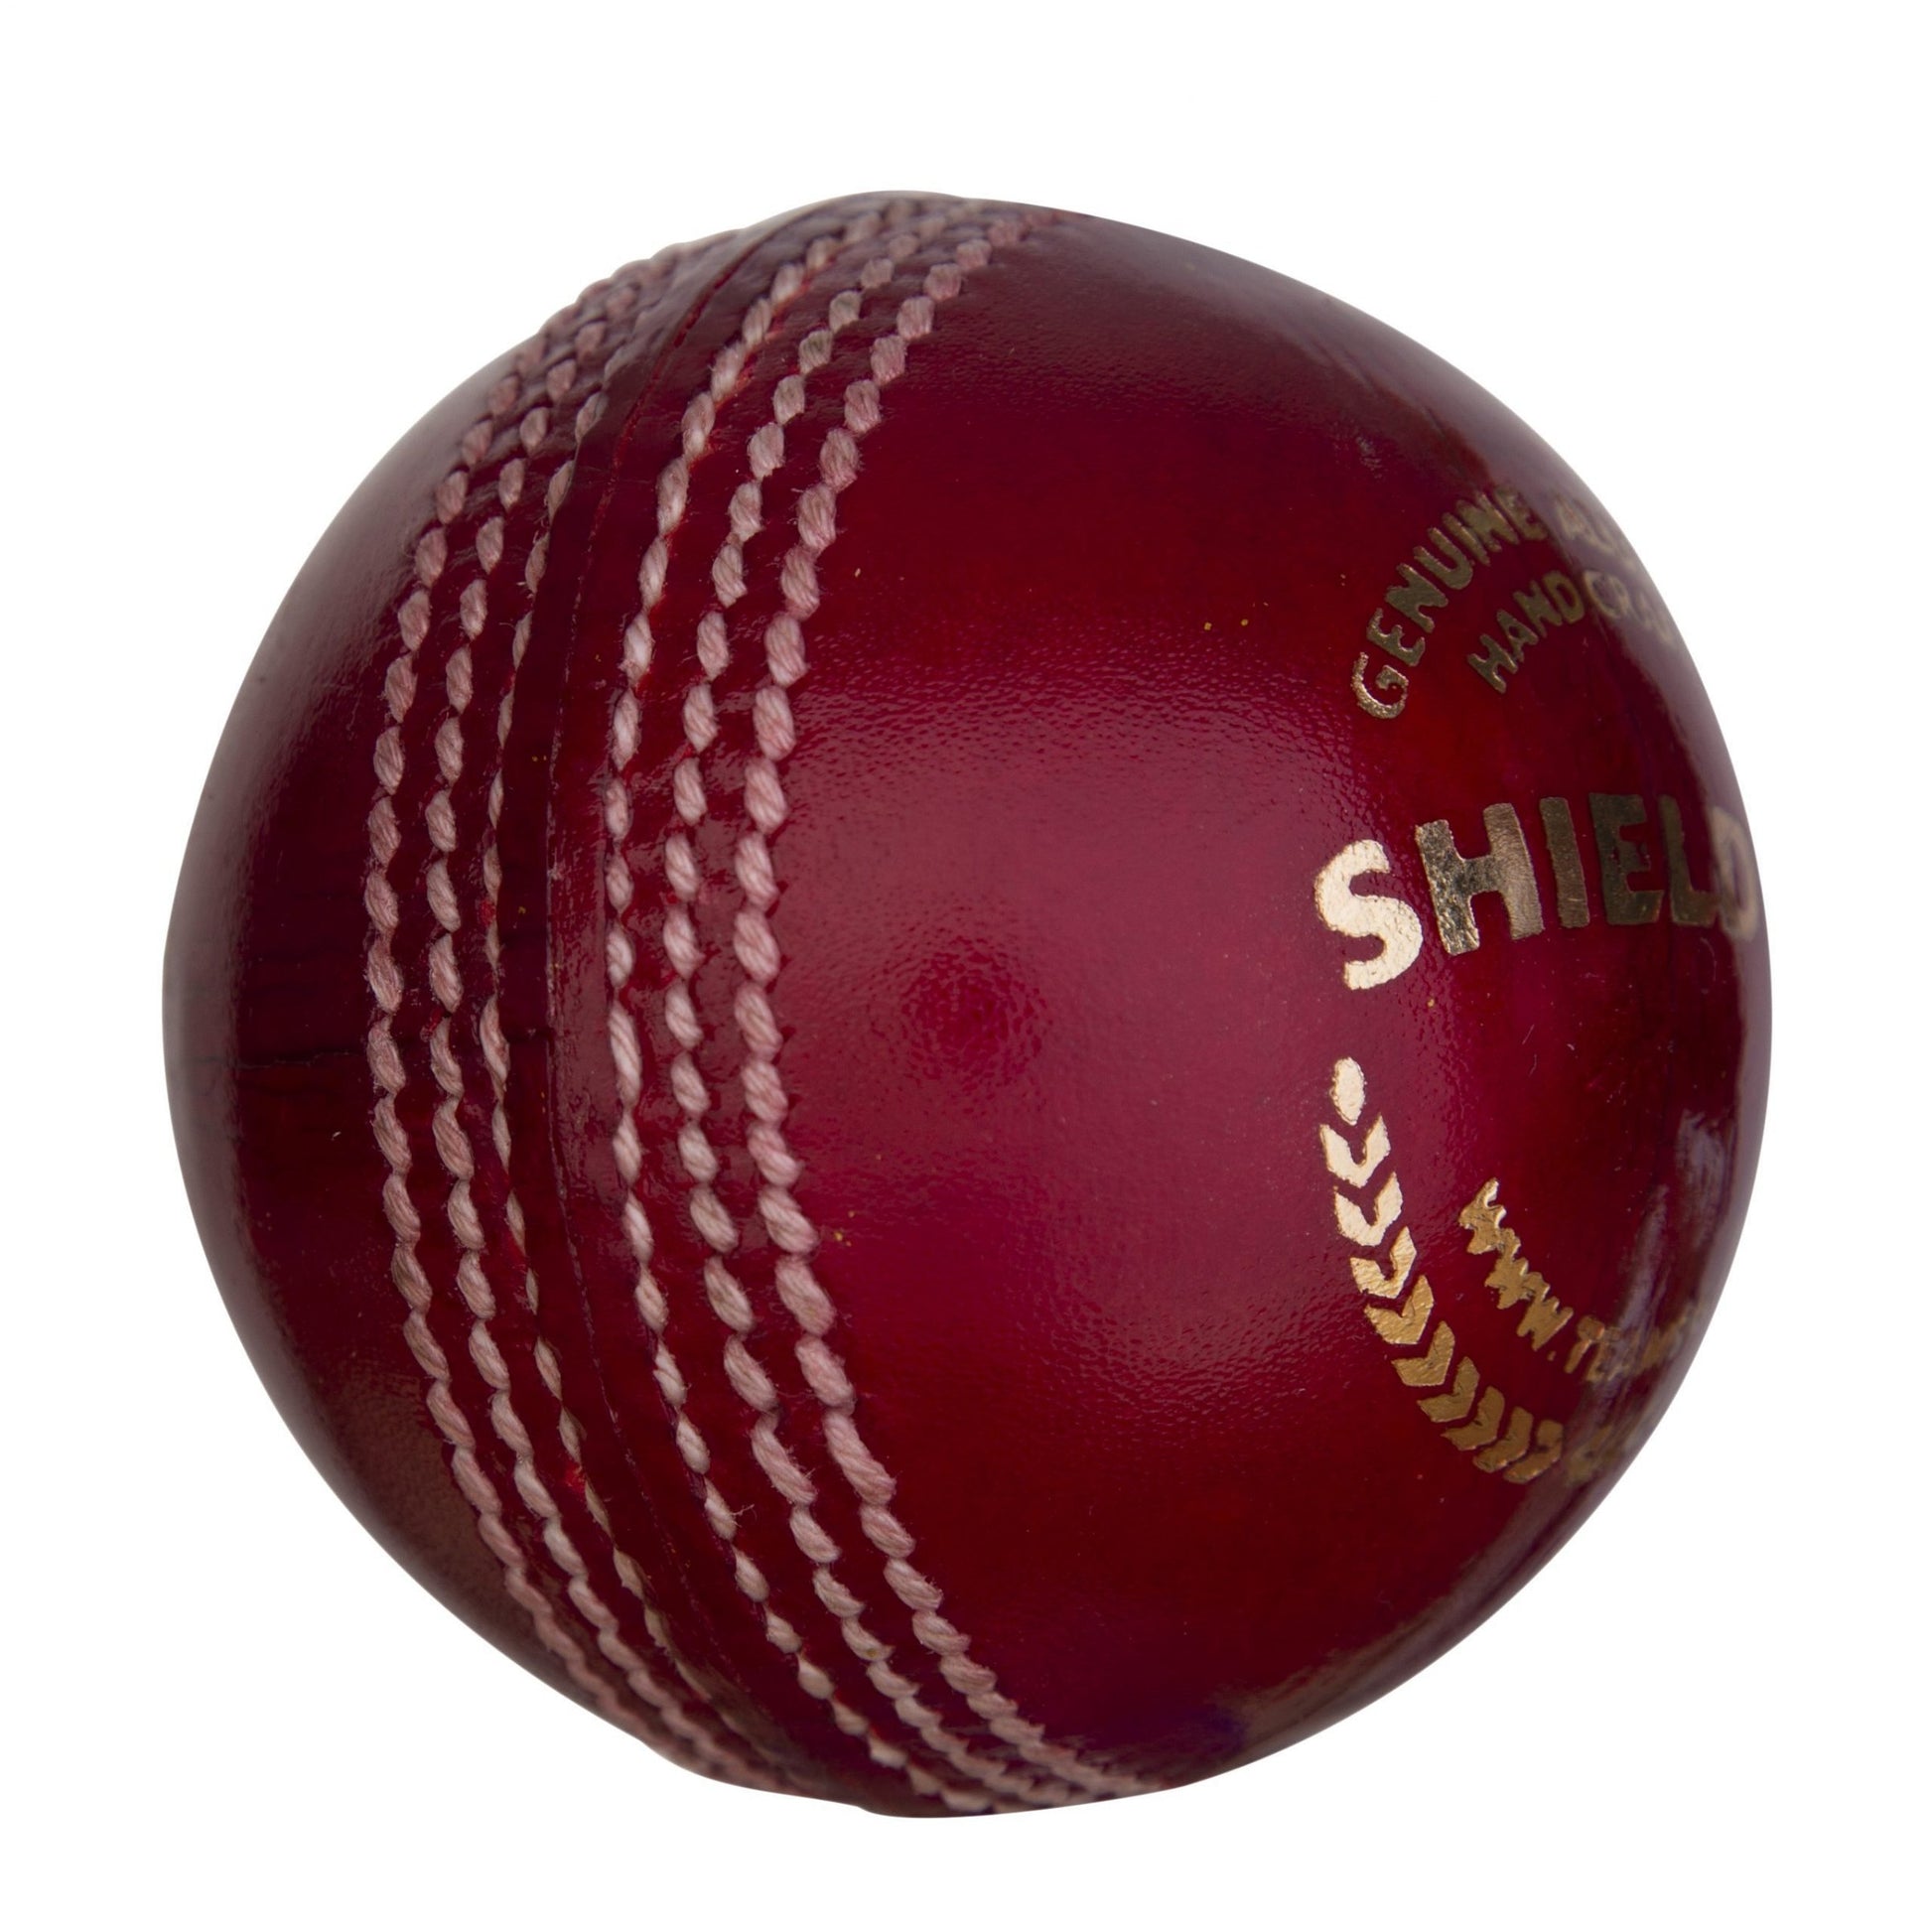 SG Shield 30 Red Cricket Leather Ball